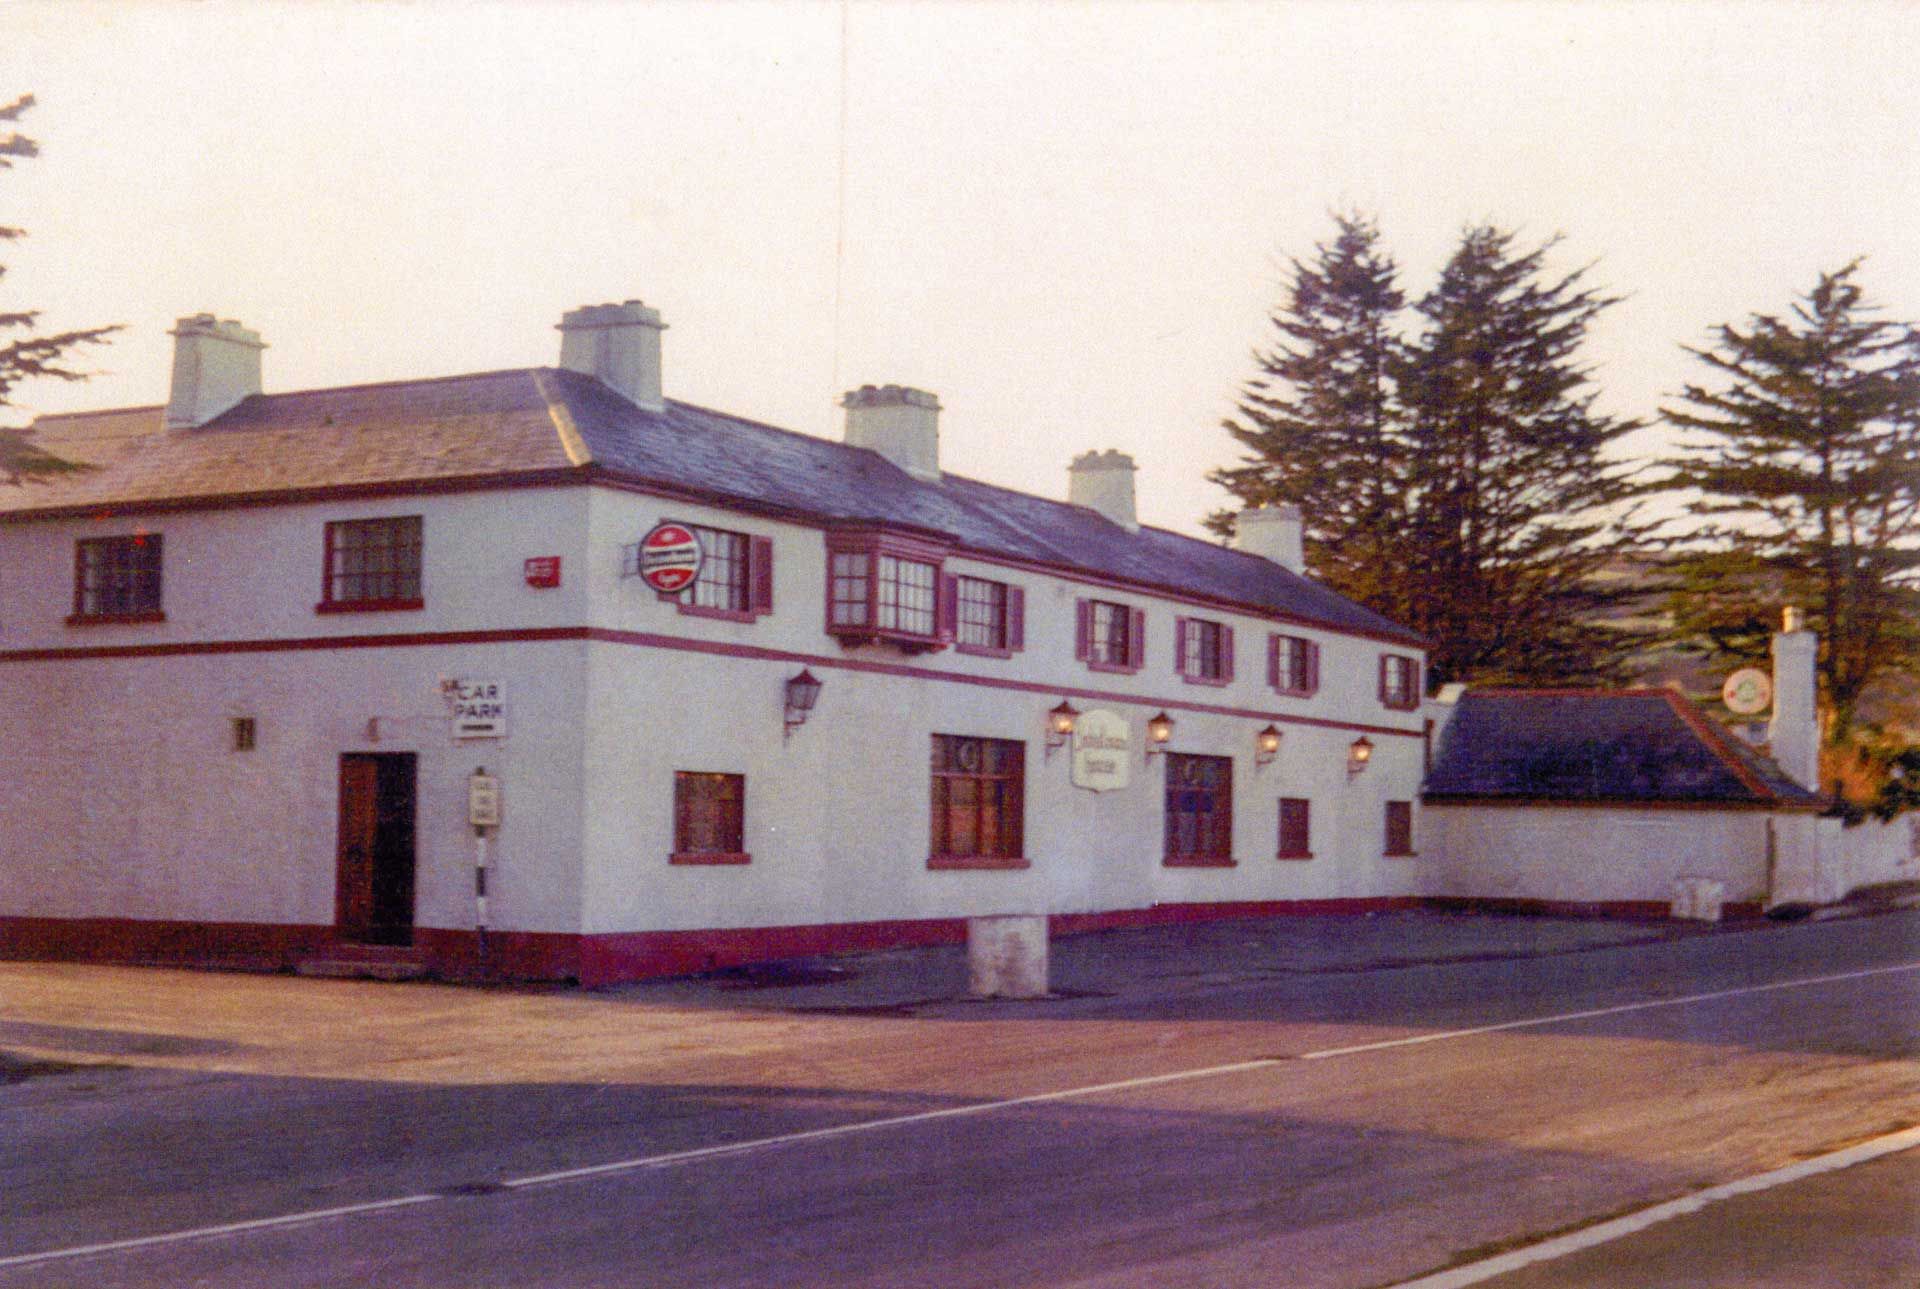 The Jobstown House